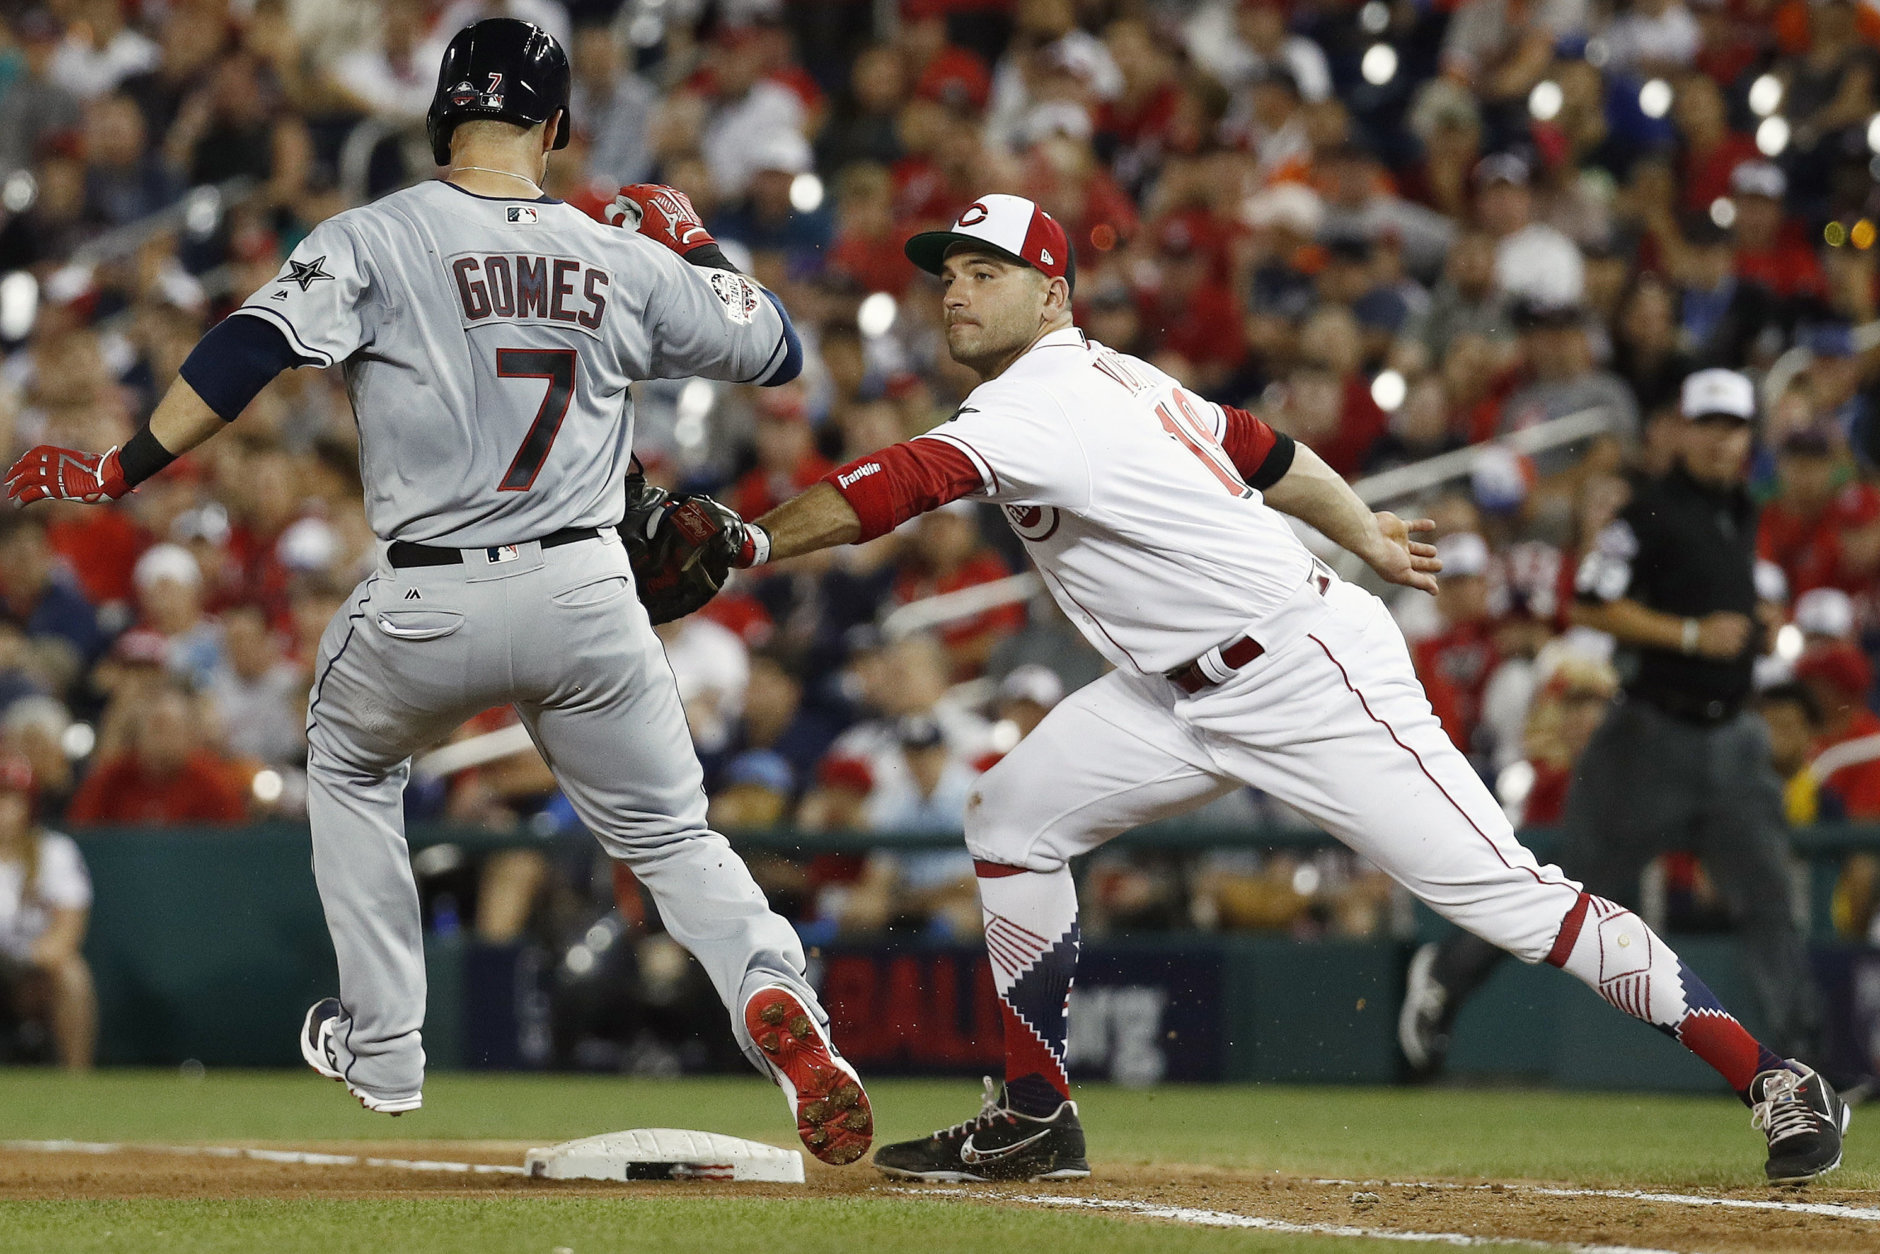 Cincinnati Reds first baseman Joey Votto (19) takes out Cleveland Indians Yan Gomes (7) during the seventh inning at the Major League Baseball All-star Game, Tuesday, July 17, 2018 in Washington. (AP Photo/Patrick Semansky)